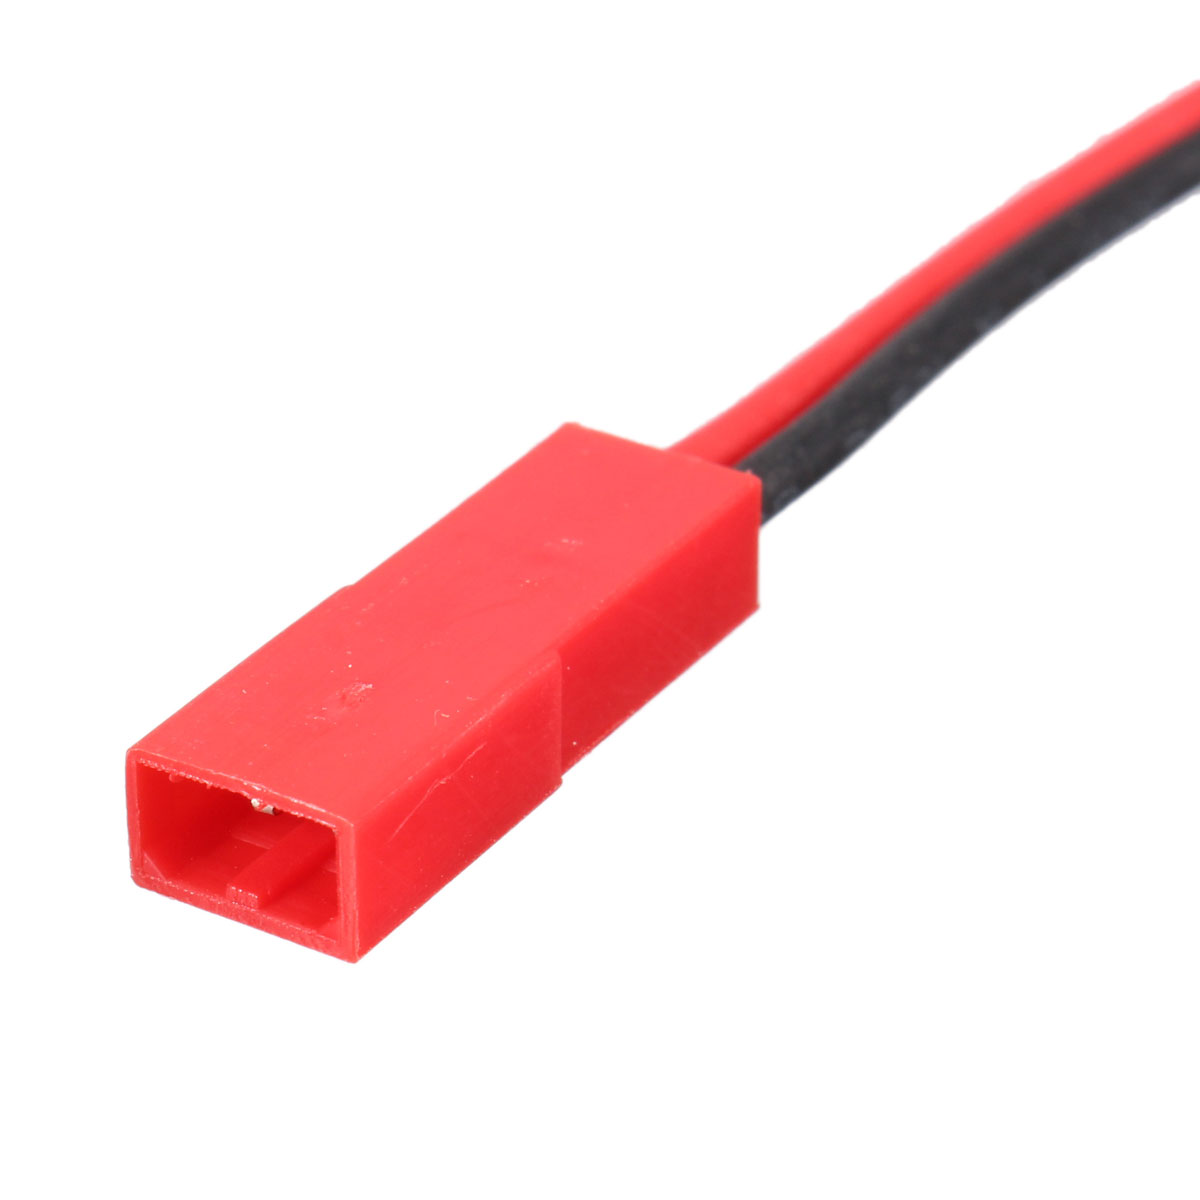 Excellwayreg-10-Pairs-2-Pins-JST-Male--Female-Connectors-Plug-Cable-Wire-Line-110mm-Red-1268119-6